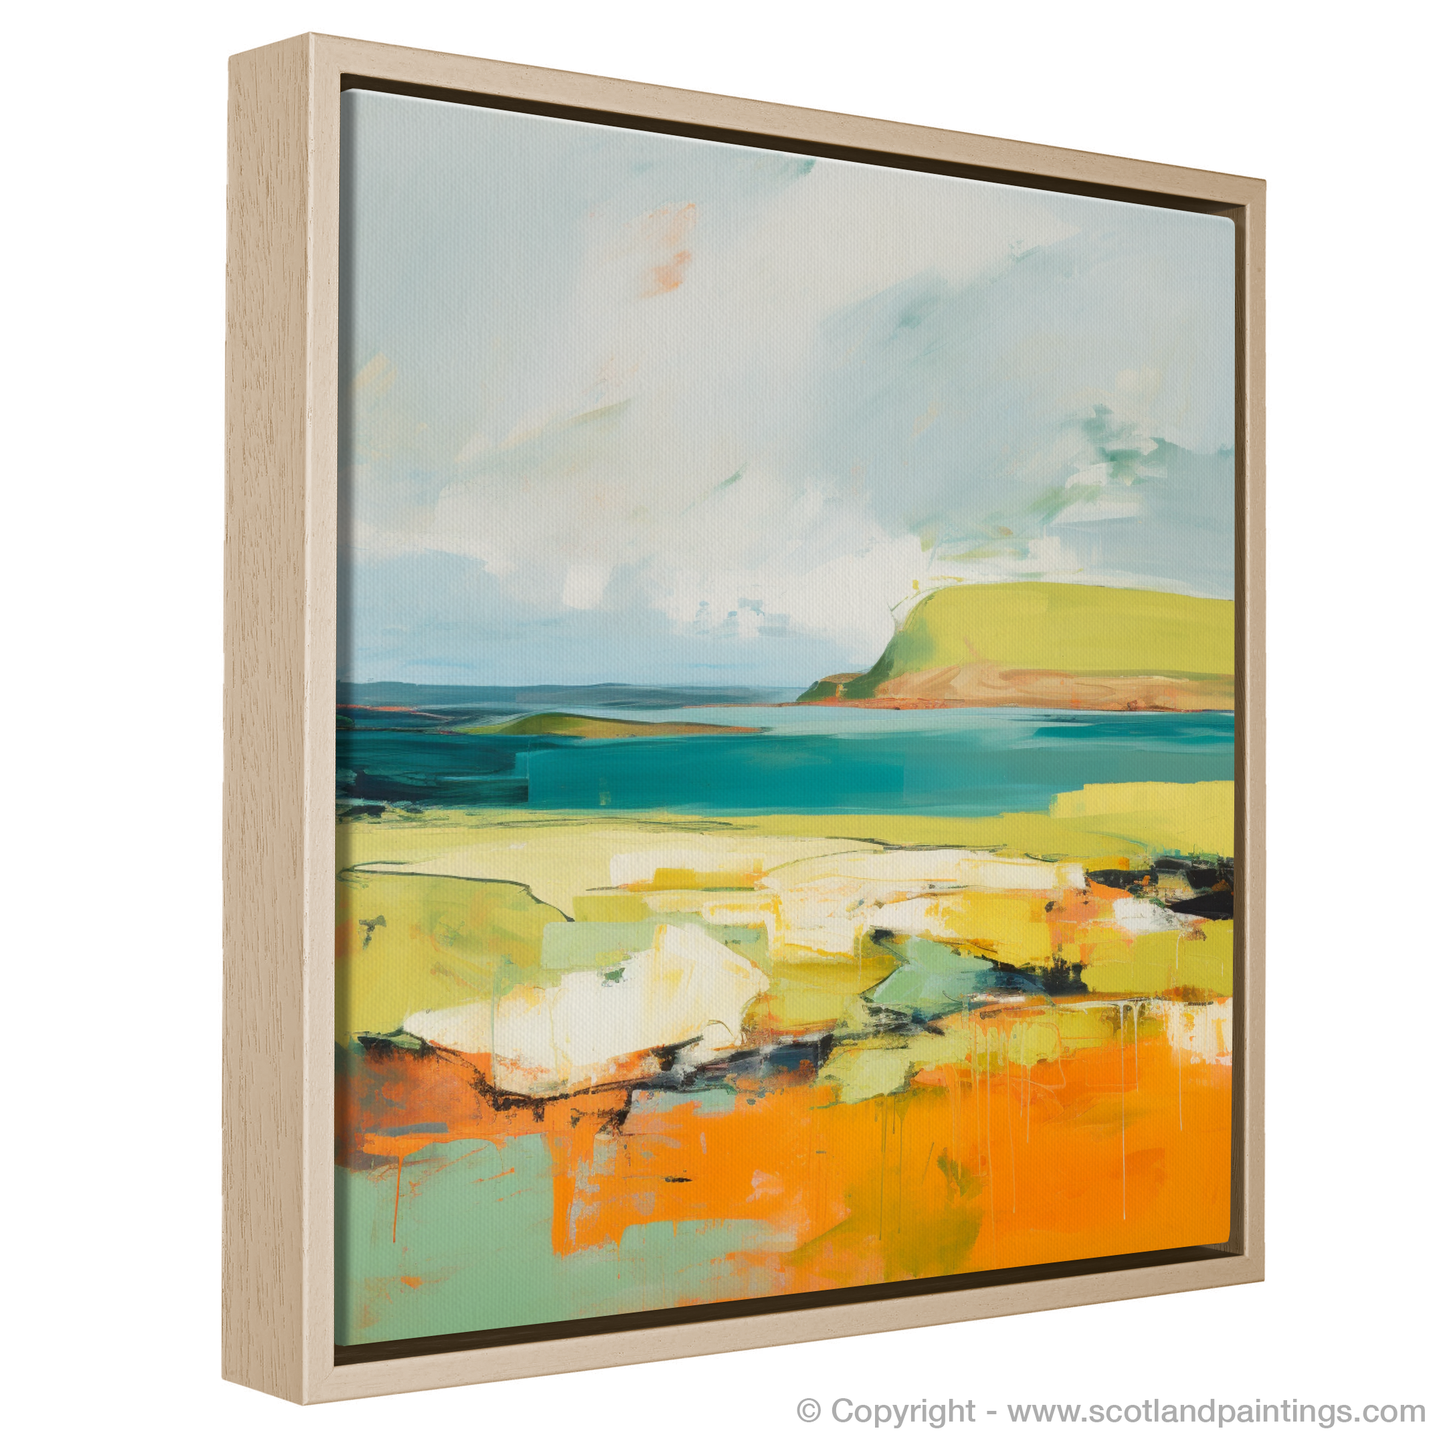 Painting and Art Print of Orkney, North of mainland Scotland in summer entitled "Orkney Summer Dreams: An Abstract Escape".